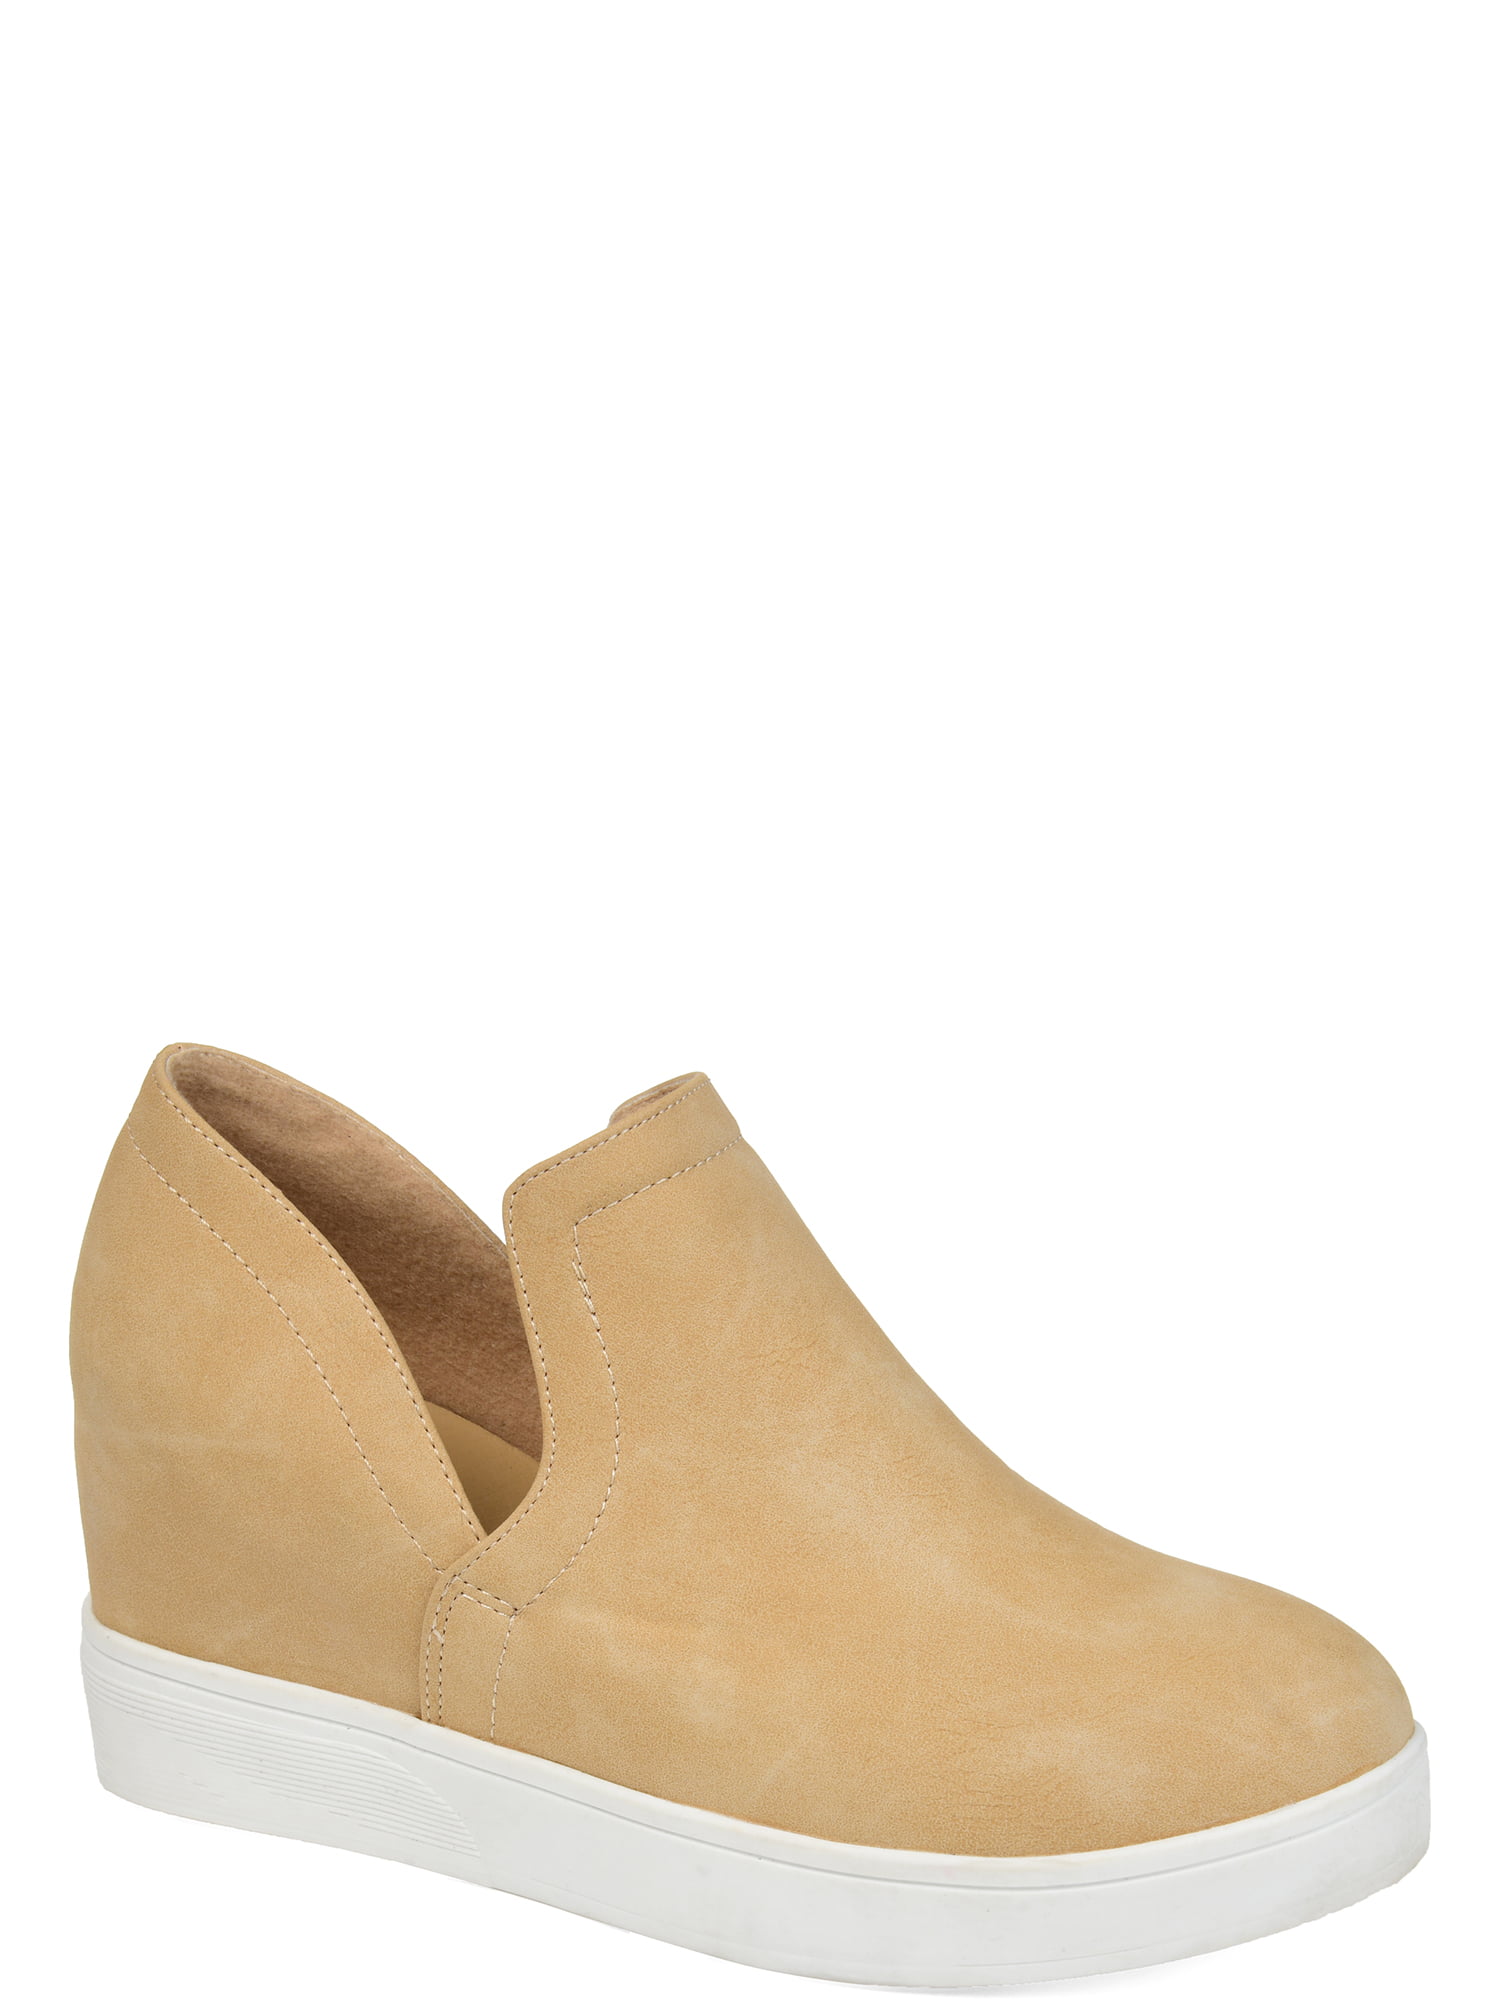 wedge cut out sneakers